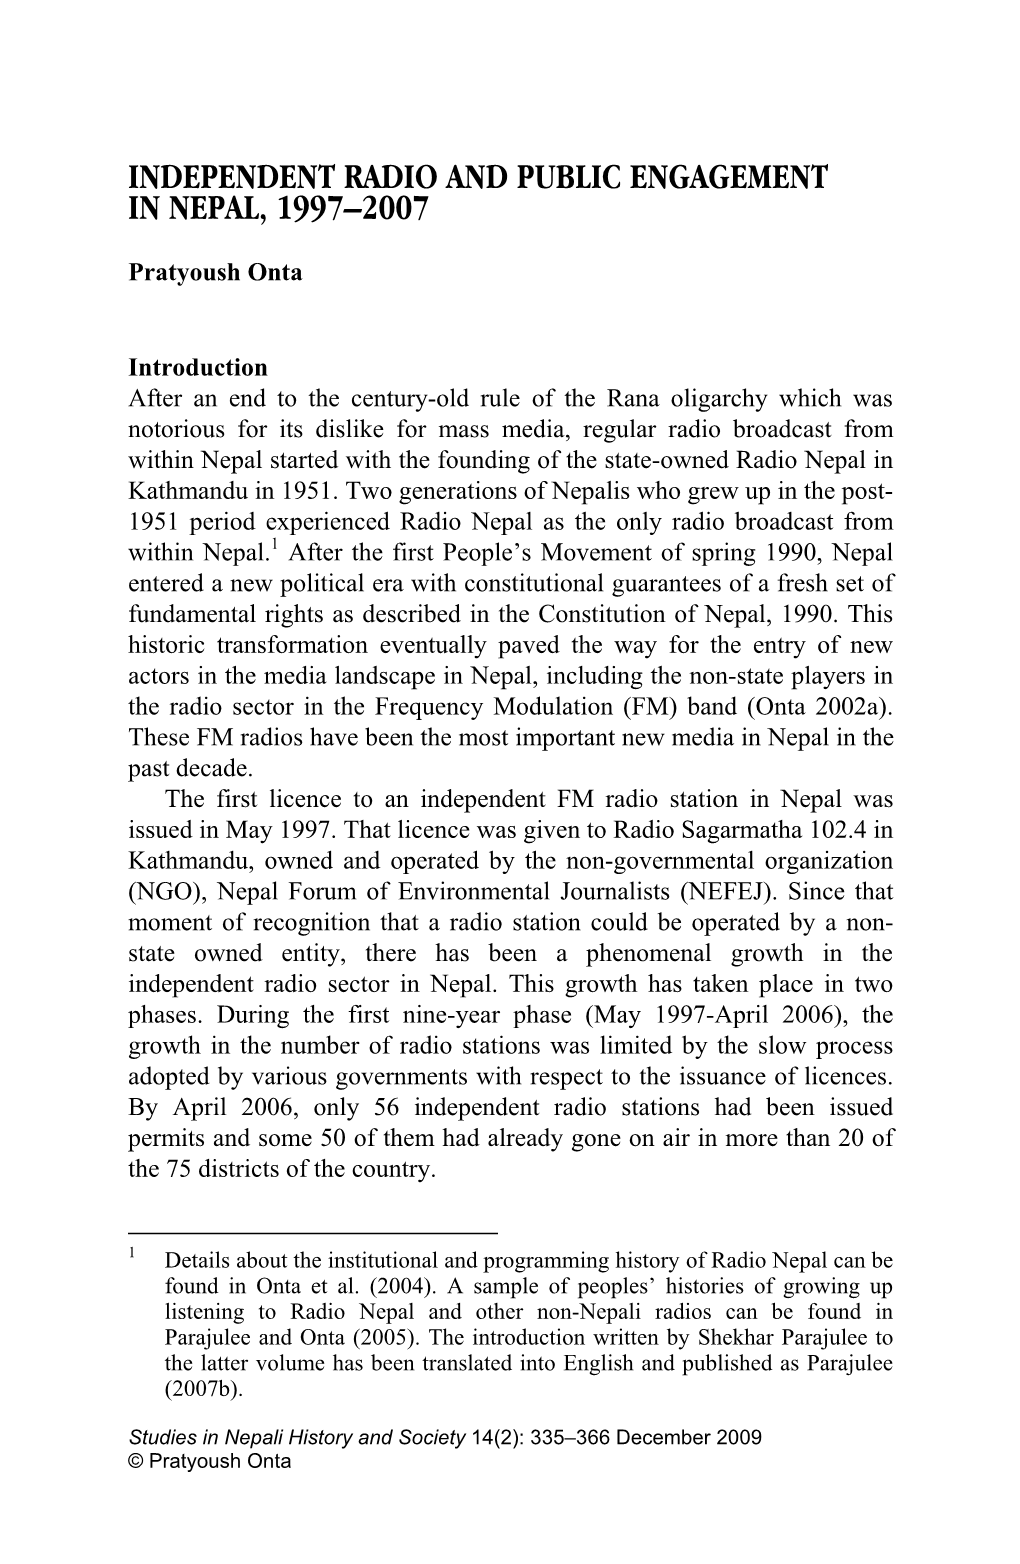 Independent Radio and Public Engagement in Nepal, 1997–2007